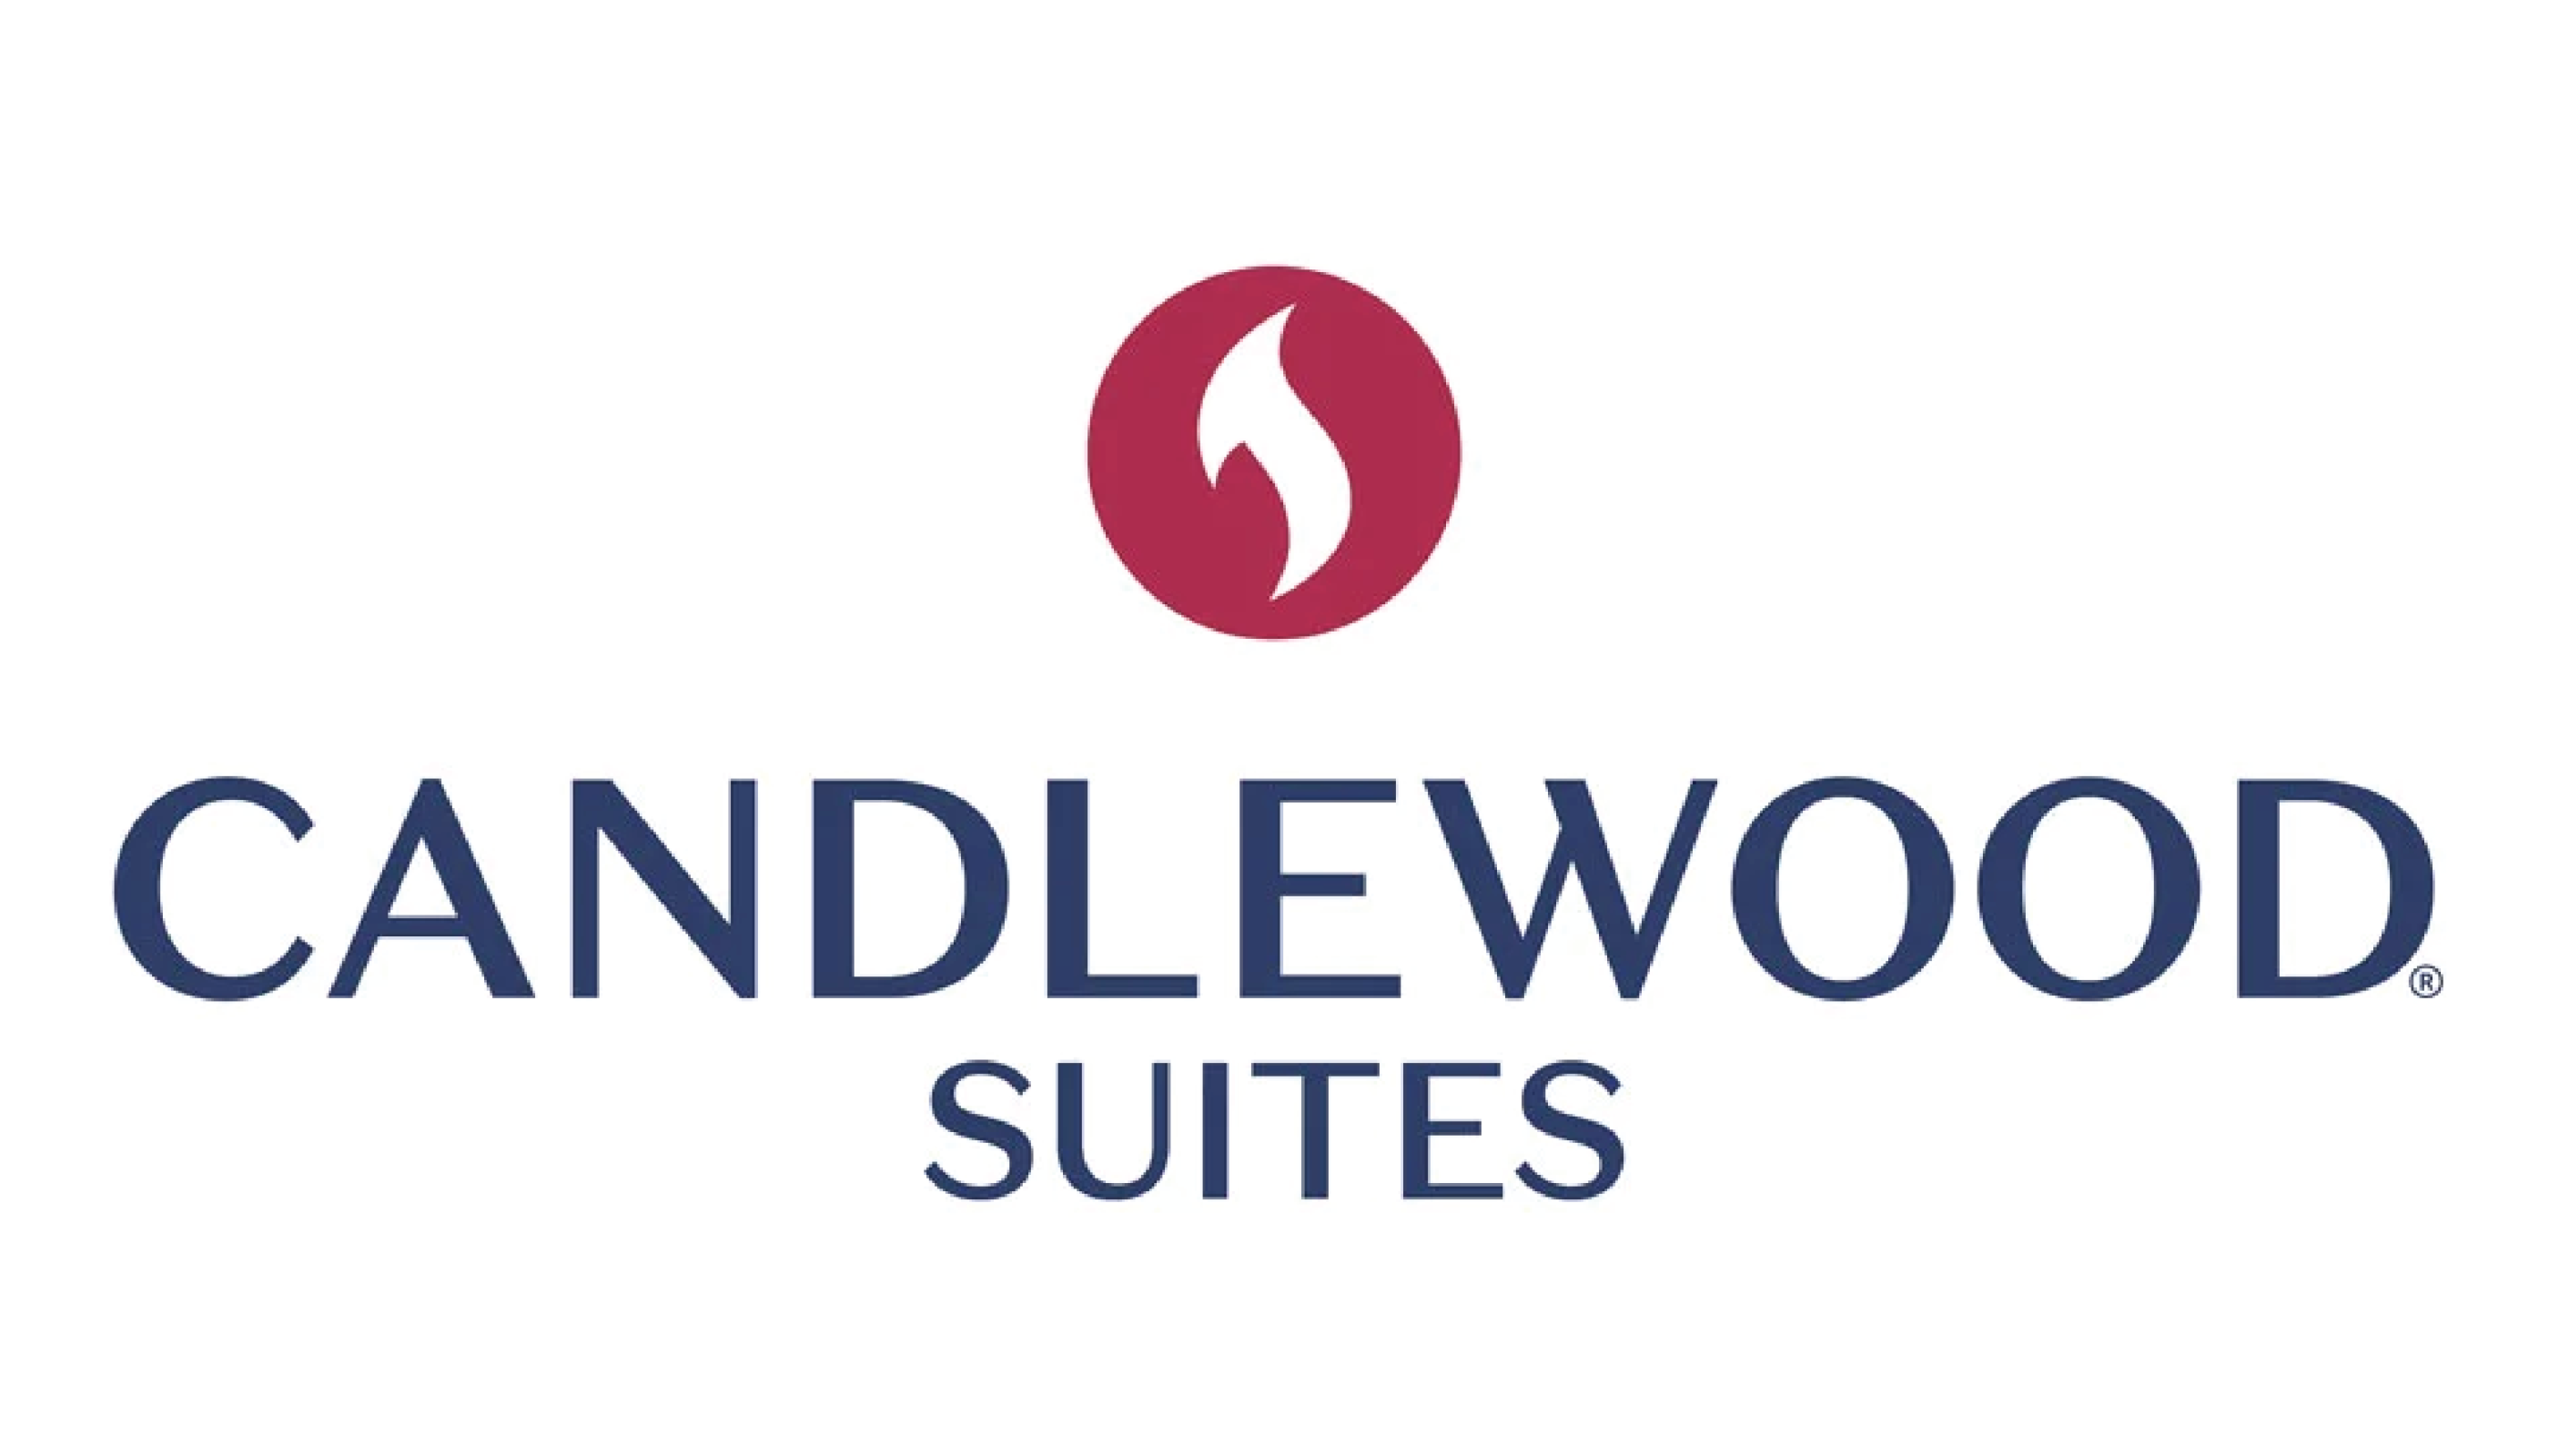 Candlewood Suites's Logo